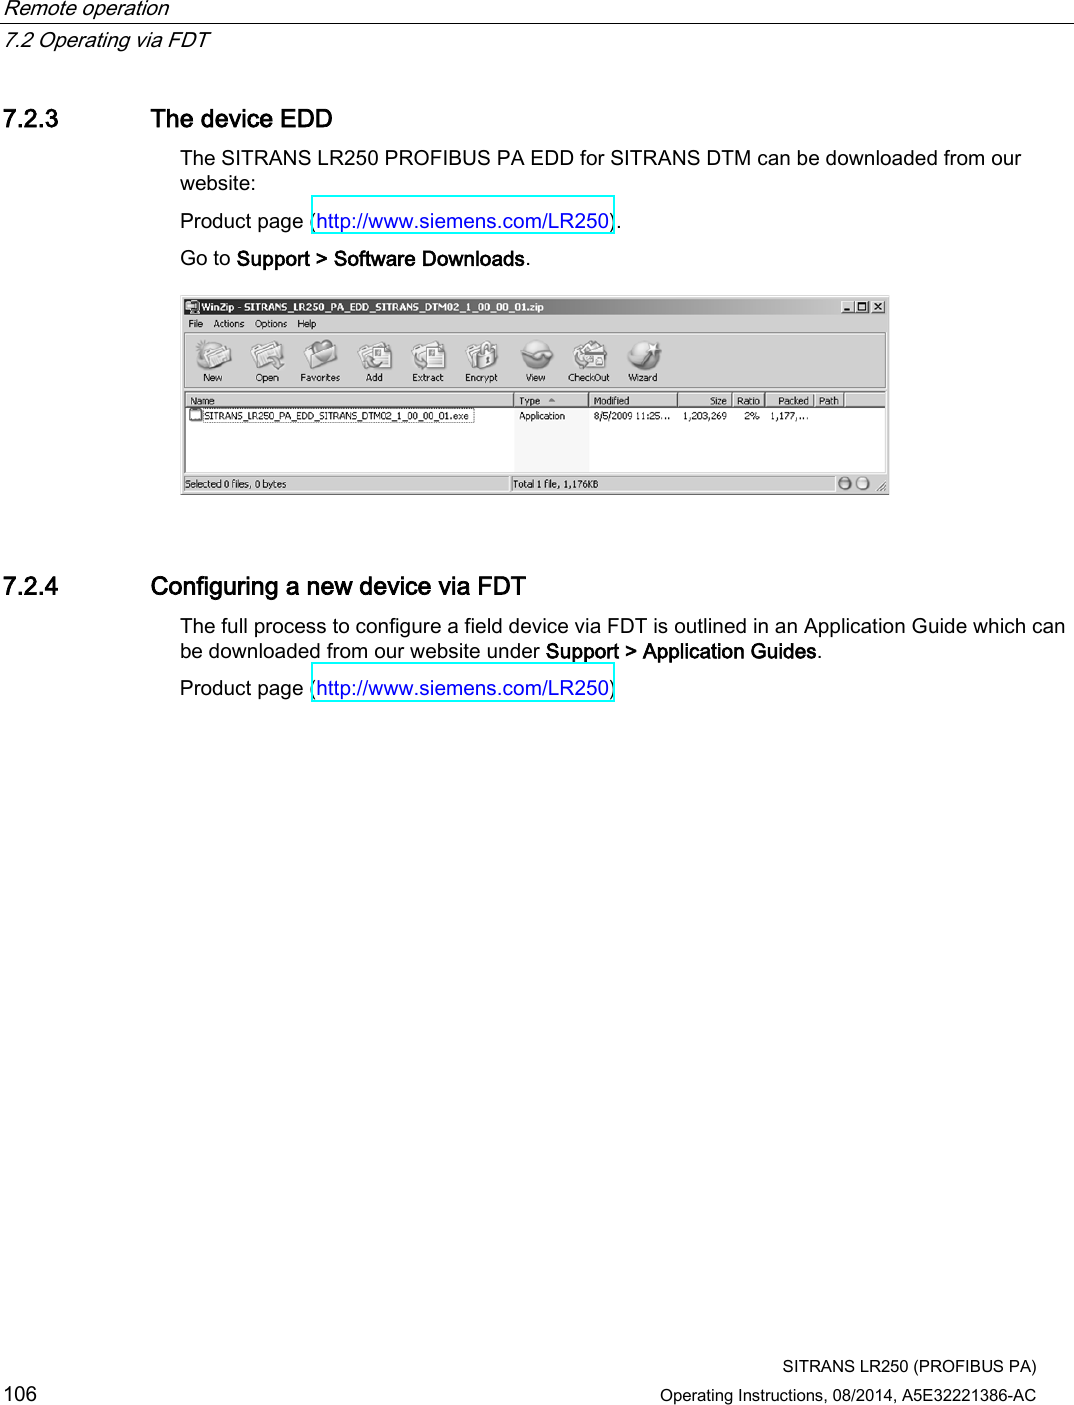 Remote operation   7.2 Operating via FDT  SITRANS LR250 (PROFIBUS PA) 106 Operating Instructions, 08/2014, A5E32221386-AC 7.2.3 The device EDD The SITRANS LR250 PROFIBUS PA EDD for SITRANS DTM can be downloaded from our website:  Product page (http://www.siemens.com/LR250).  Go to Support &gt; Software Downloads.  7.2.4 Configuring a new device via FDT The full process to configure a field device via FDT is outlined in an Application Guide which can be downloaded from our website under Support &gt; Application Guides.  Product page (http://www.siemens.com/LR250)  